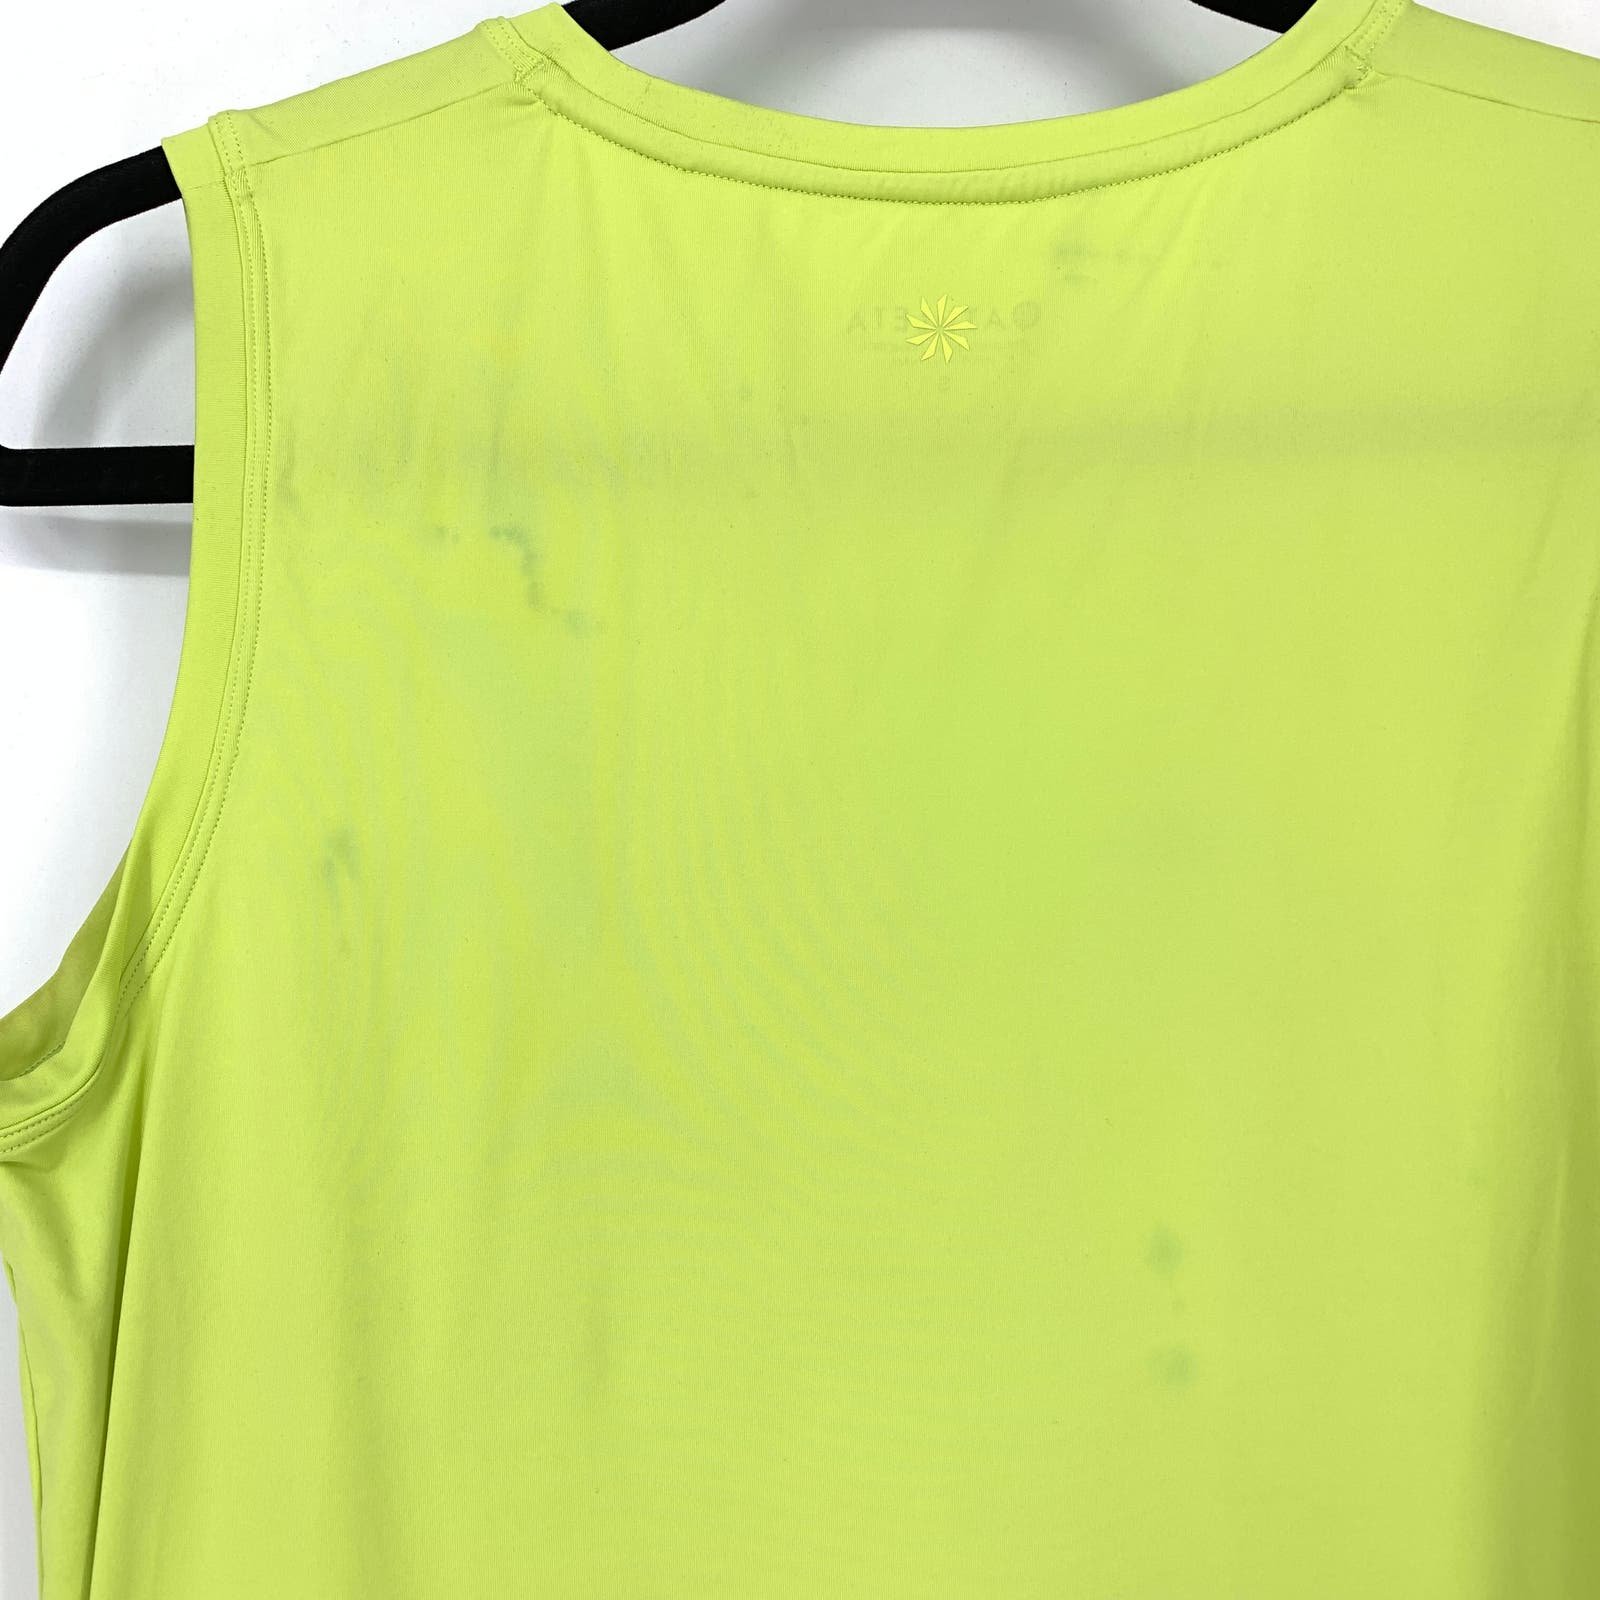 Special offer  Athleta Tank Top Women´s Size Small Muscle Tee Sleeveless Neon Yellow P4GzFTEp3 outlet online shop